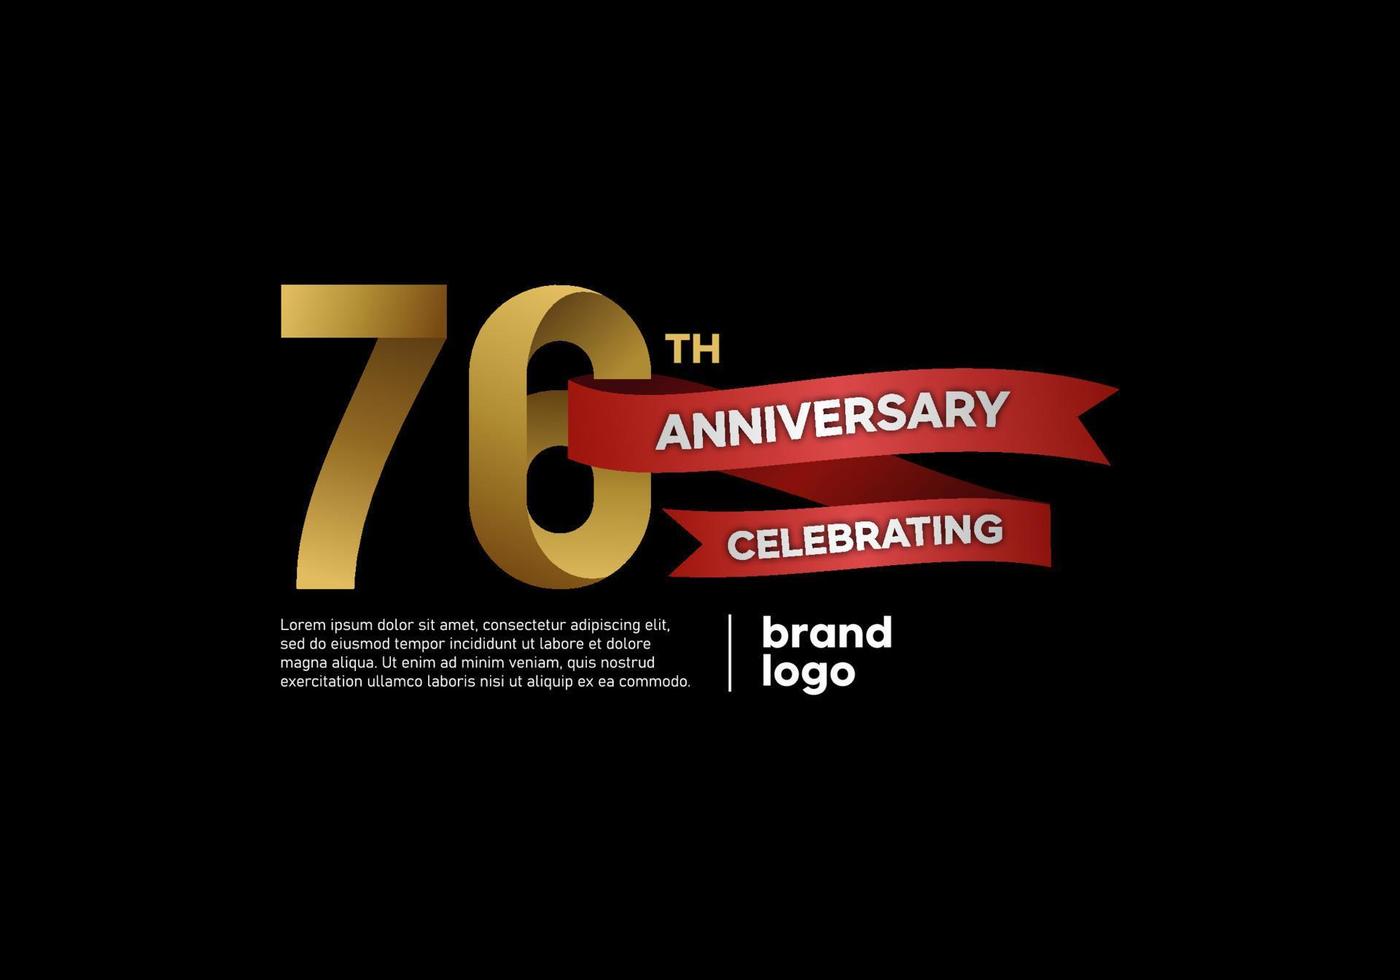 76 year anniversary logo in gold and red on black background vector